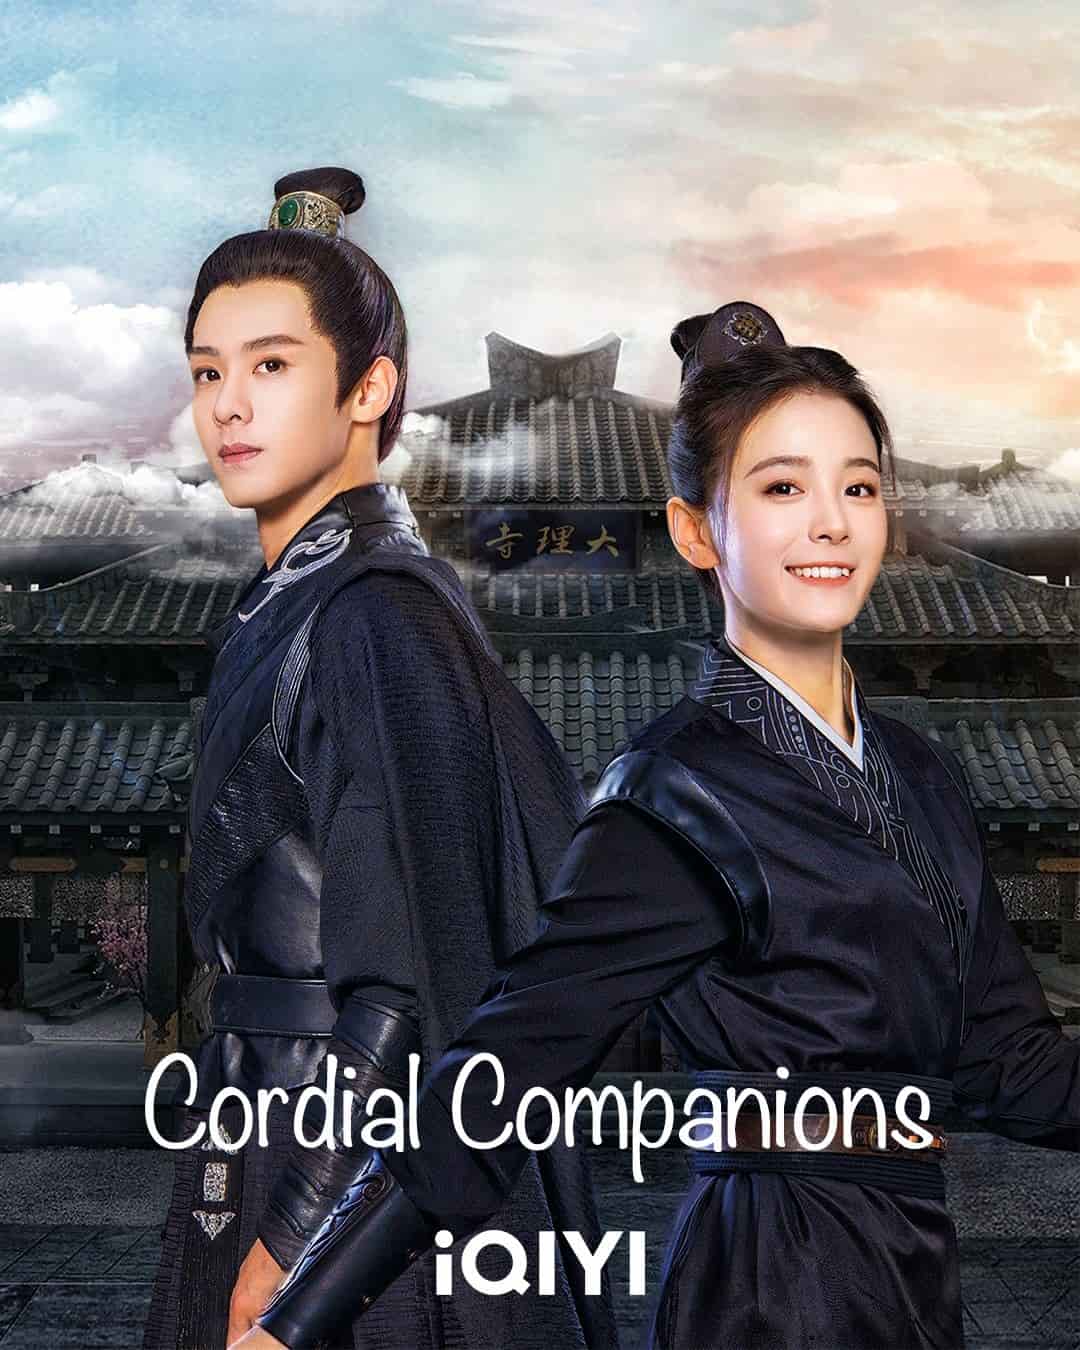 Cordial Companions - Sinopsis, Pemain, OST, Episode, Review